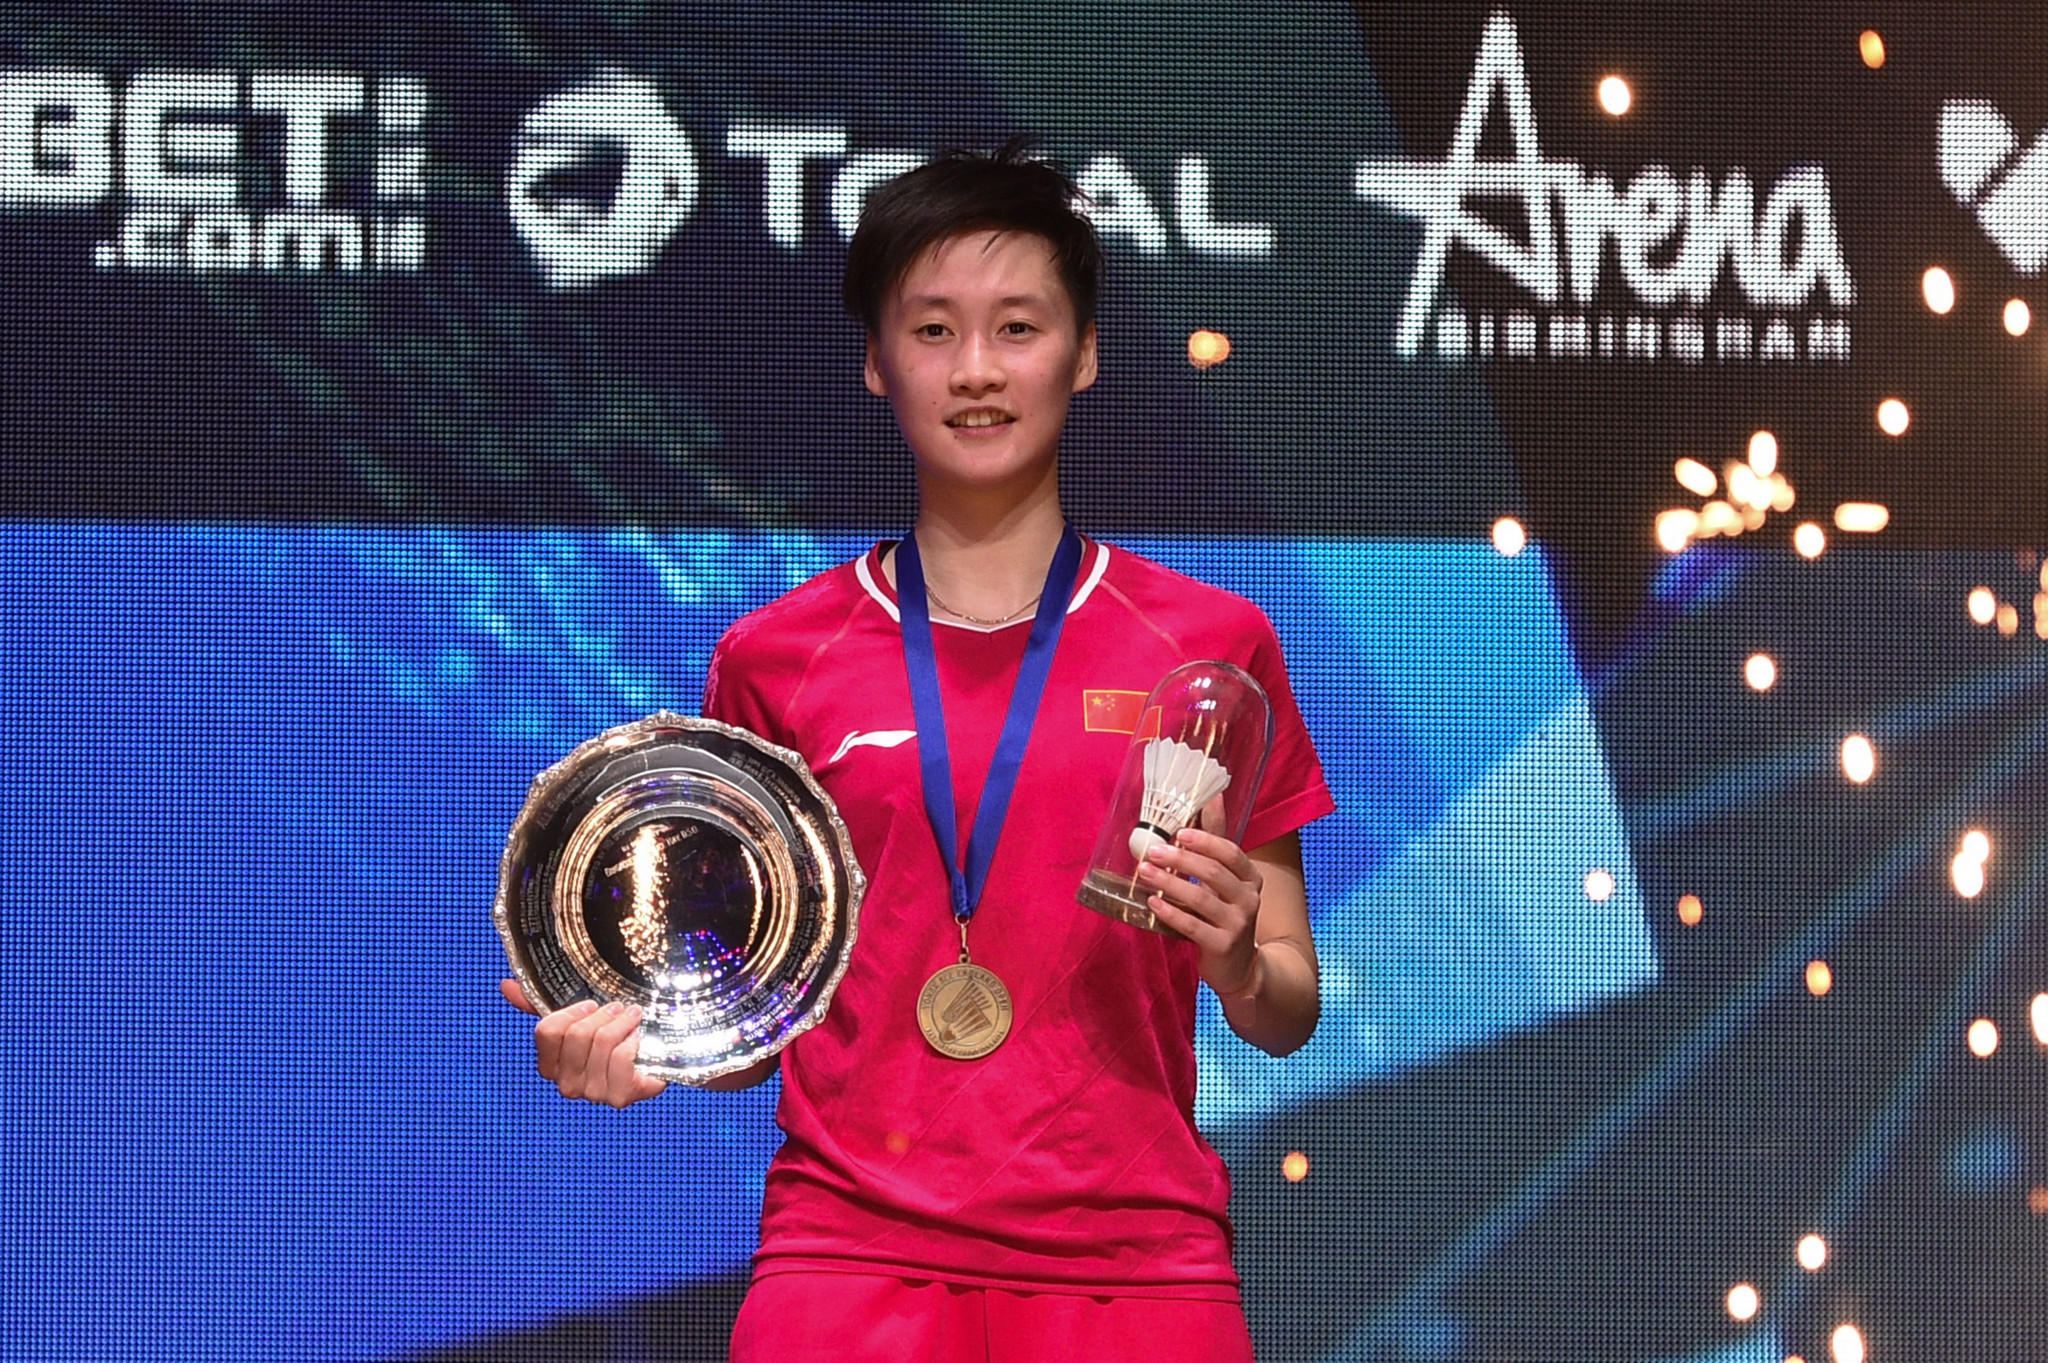 Chen Yufei was crowned as the women's champion  ©Getty Images